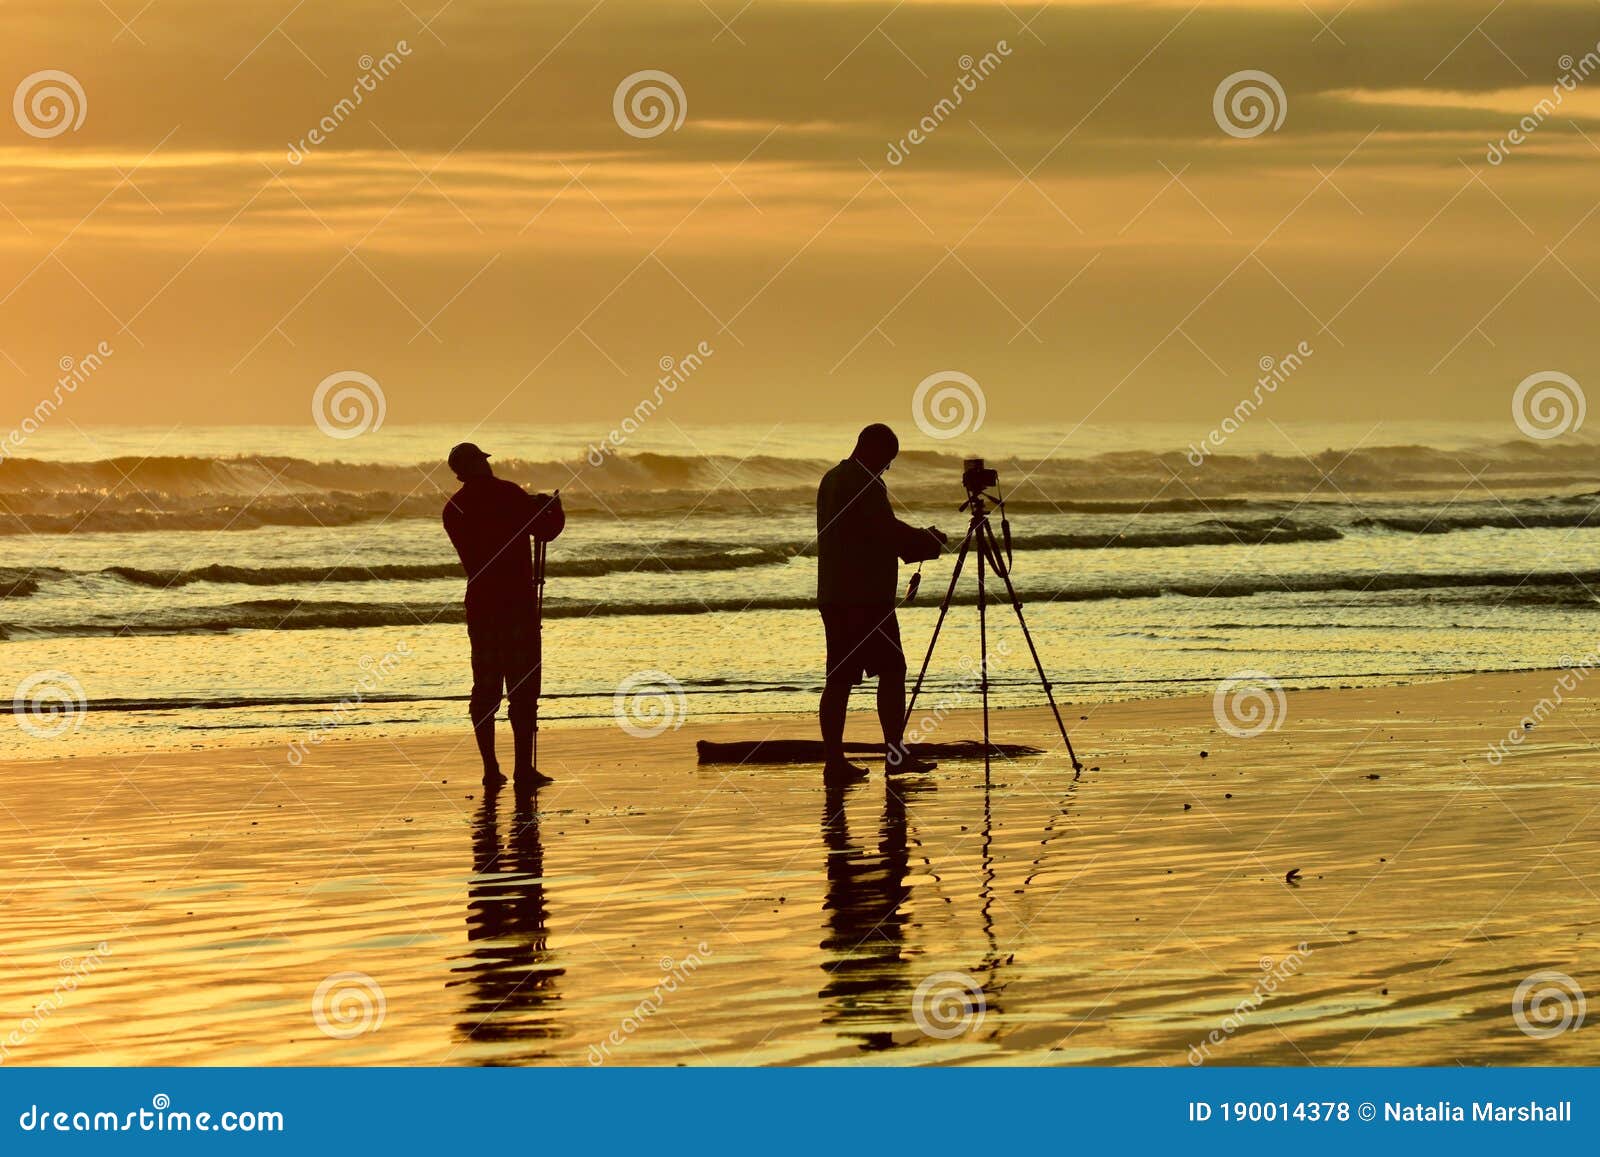 An Unidentified Photographer Taking Photographs Of A Sunset At The Sea